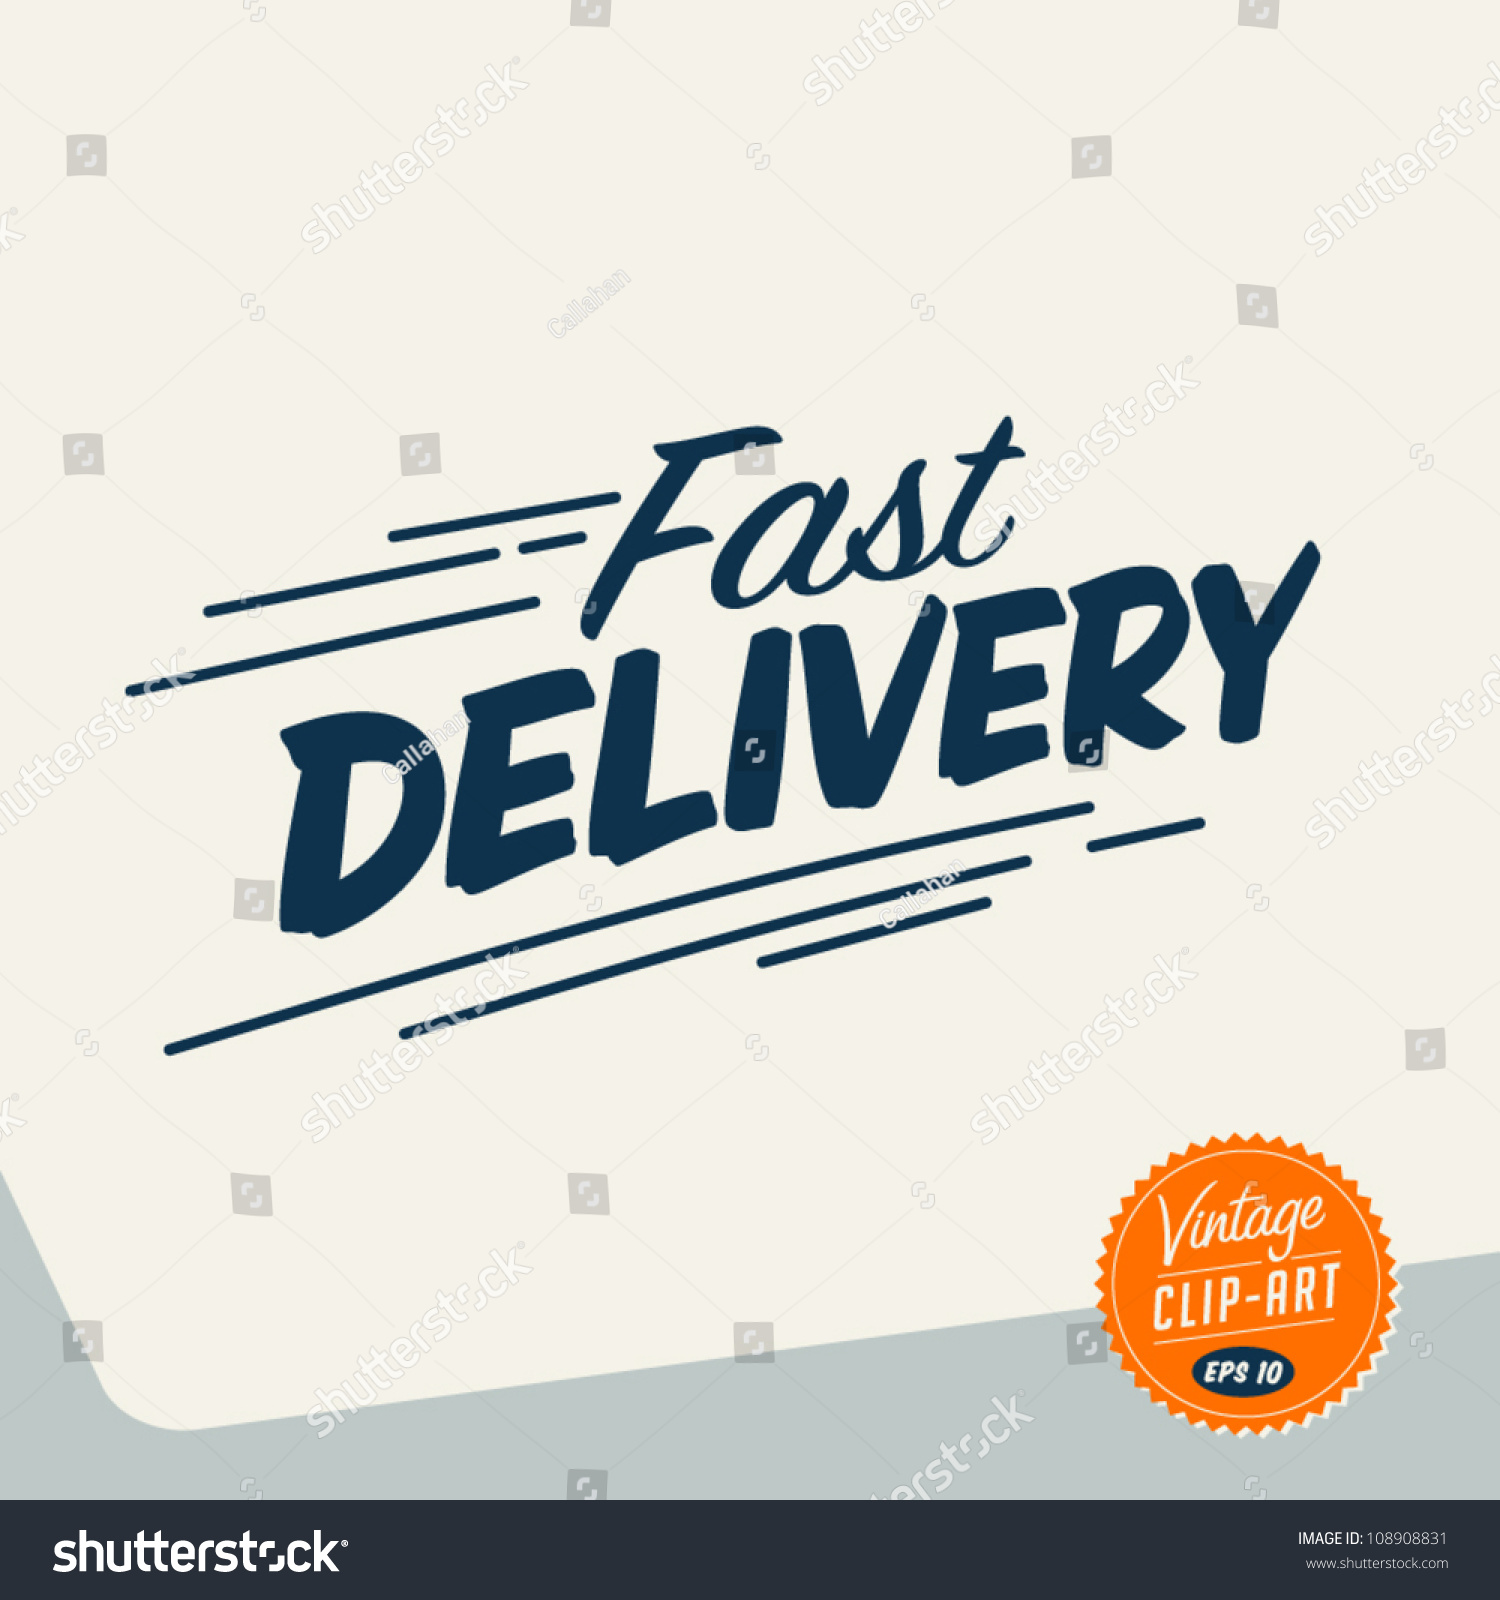 home delivery clipart - photo #28